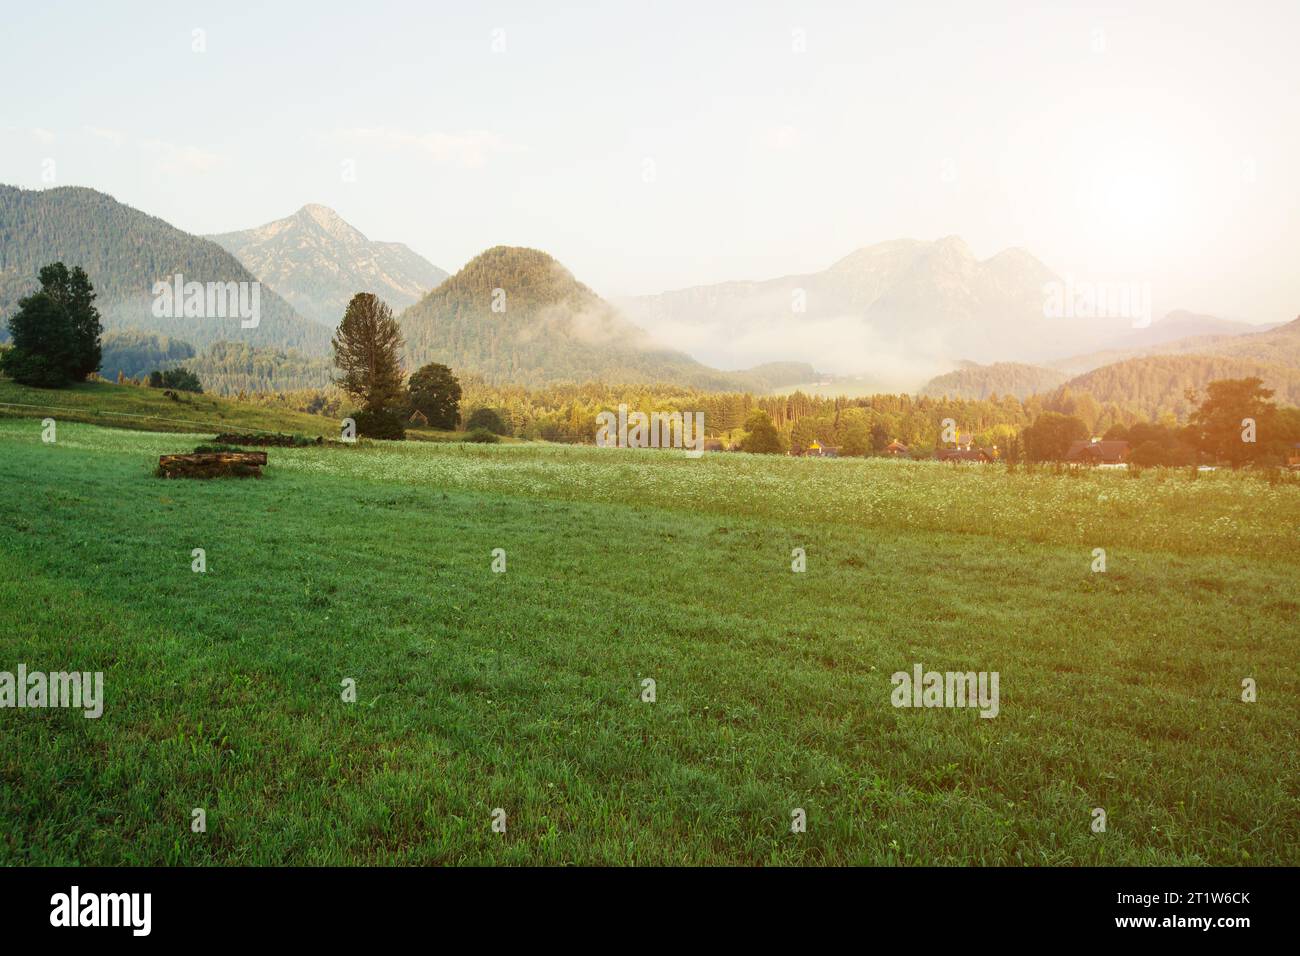 Fantastic views of the morning field glowing by sunlight. Dramatic and picturesque scene. Location resort Grundlsee, Liezen District of Styria, Austri Stock Photo